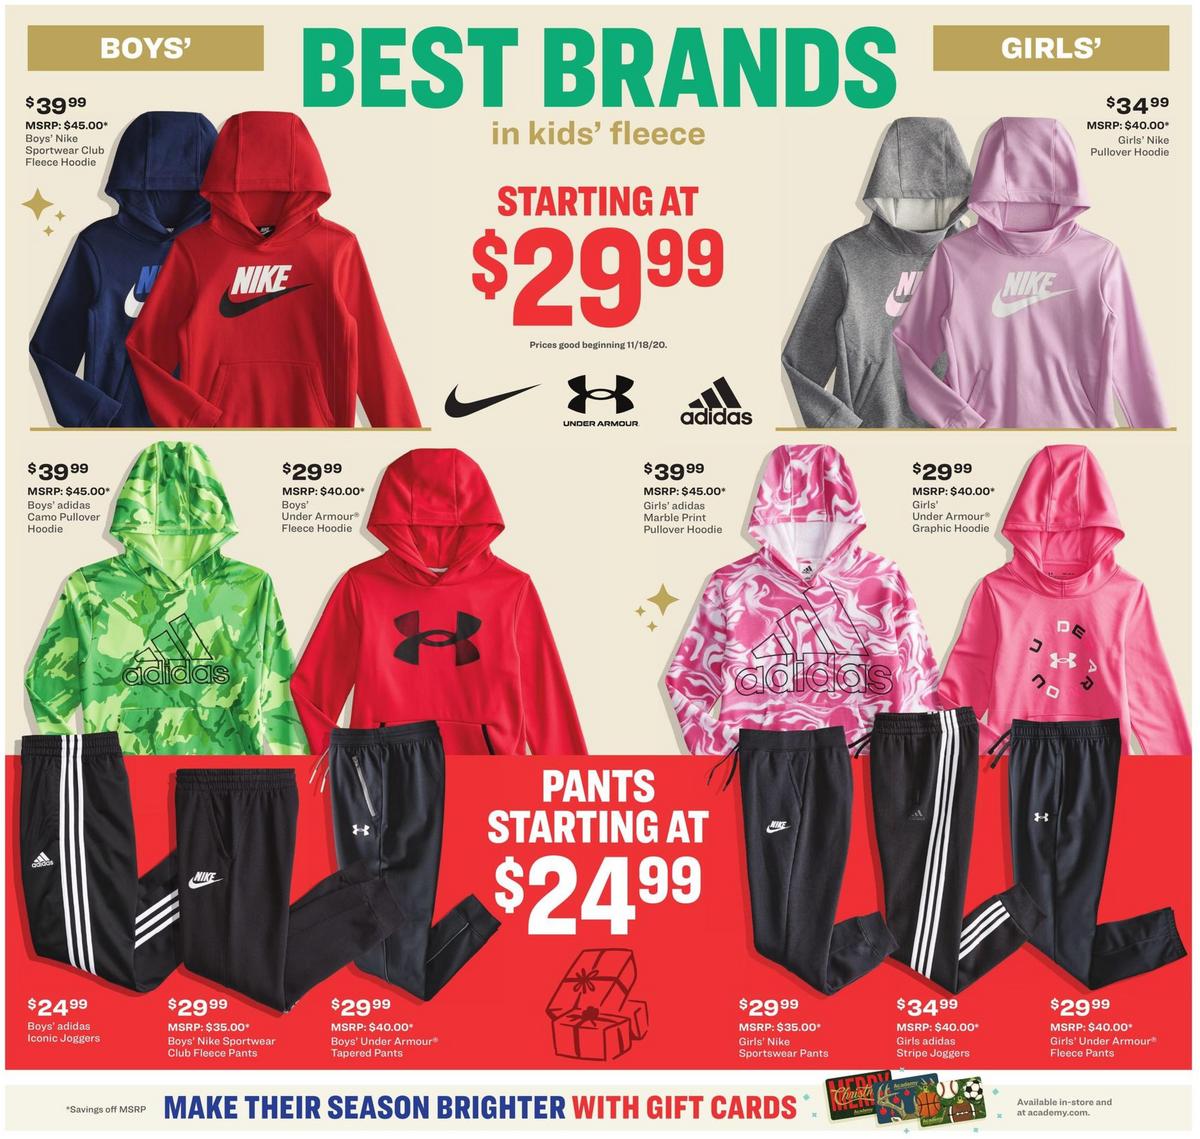 Academy Sports + Outdoors Weekly Ad from November 16